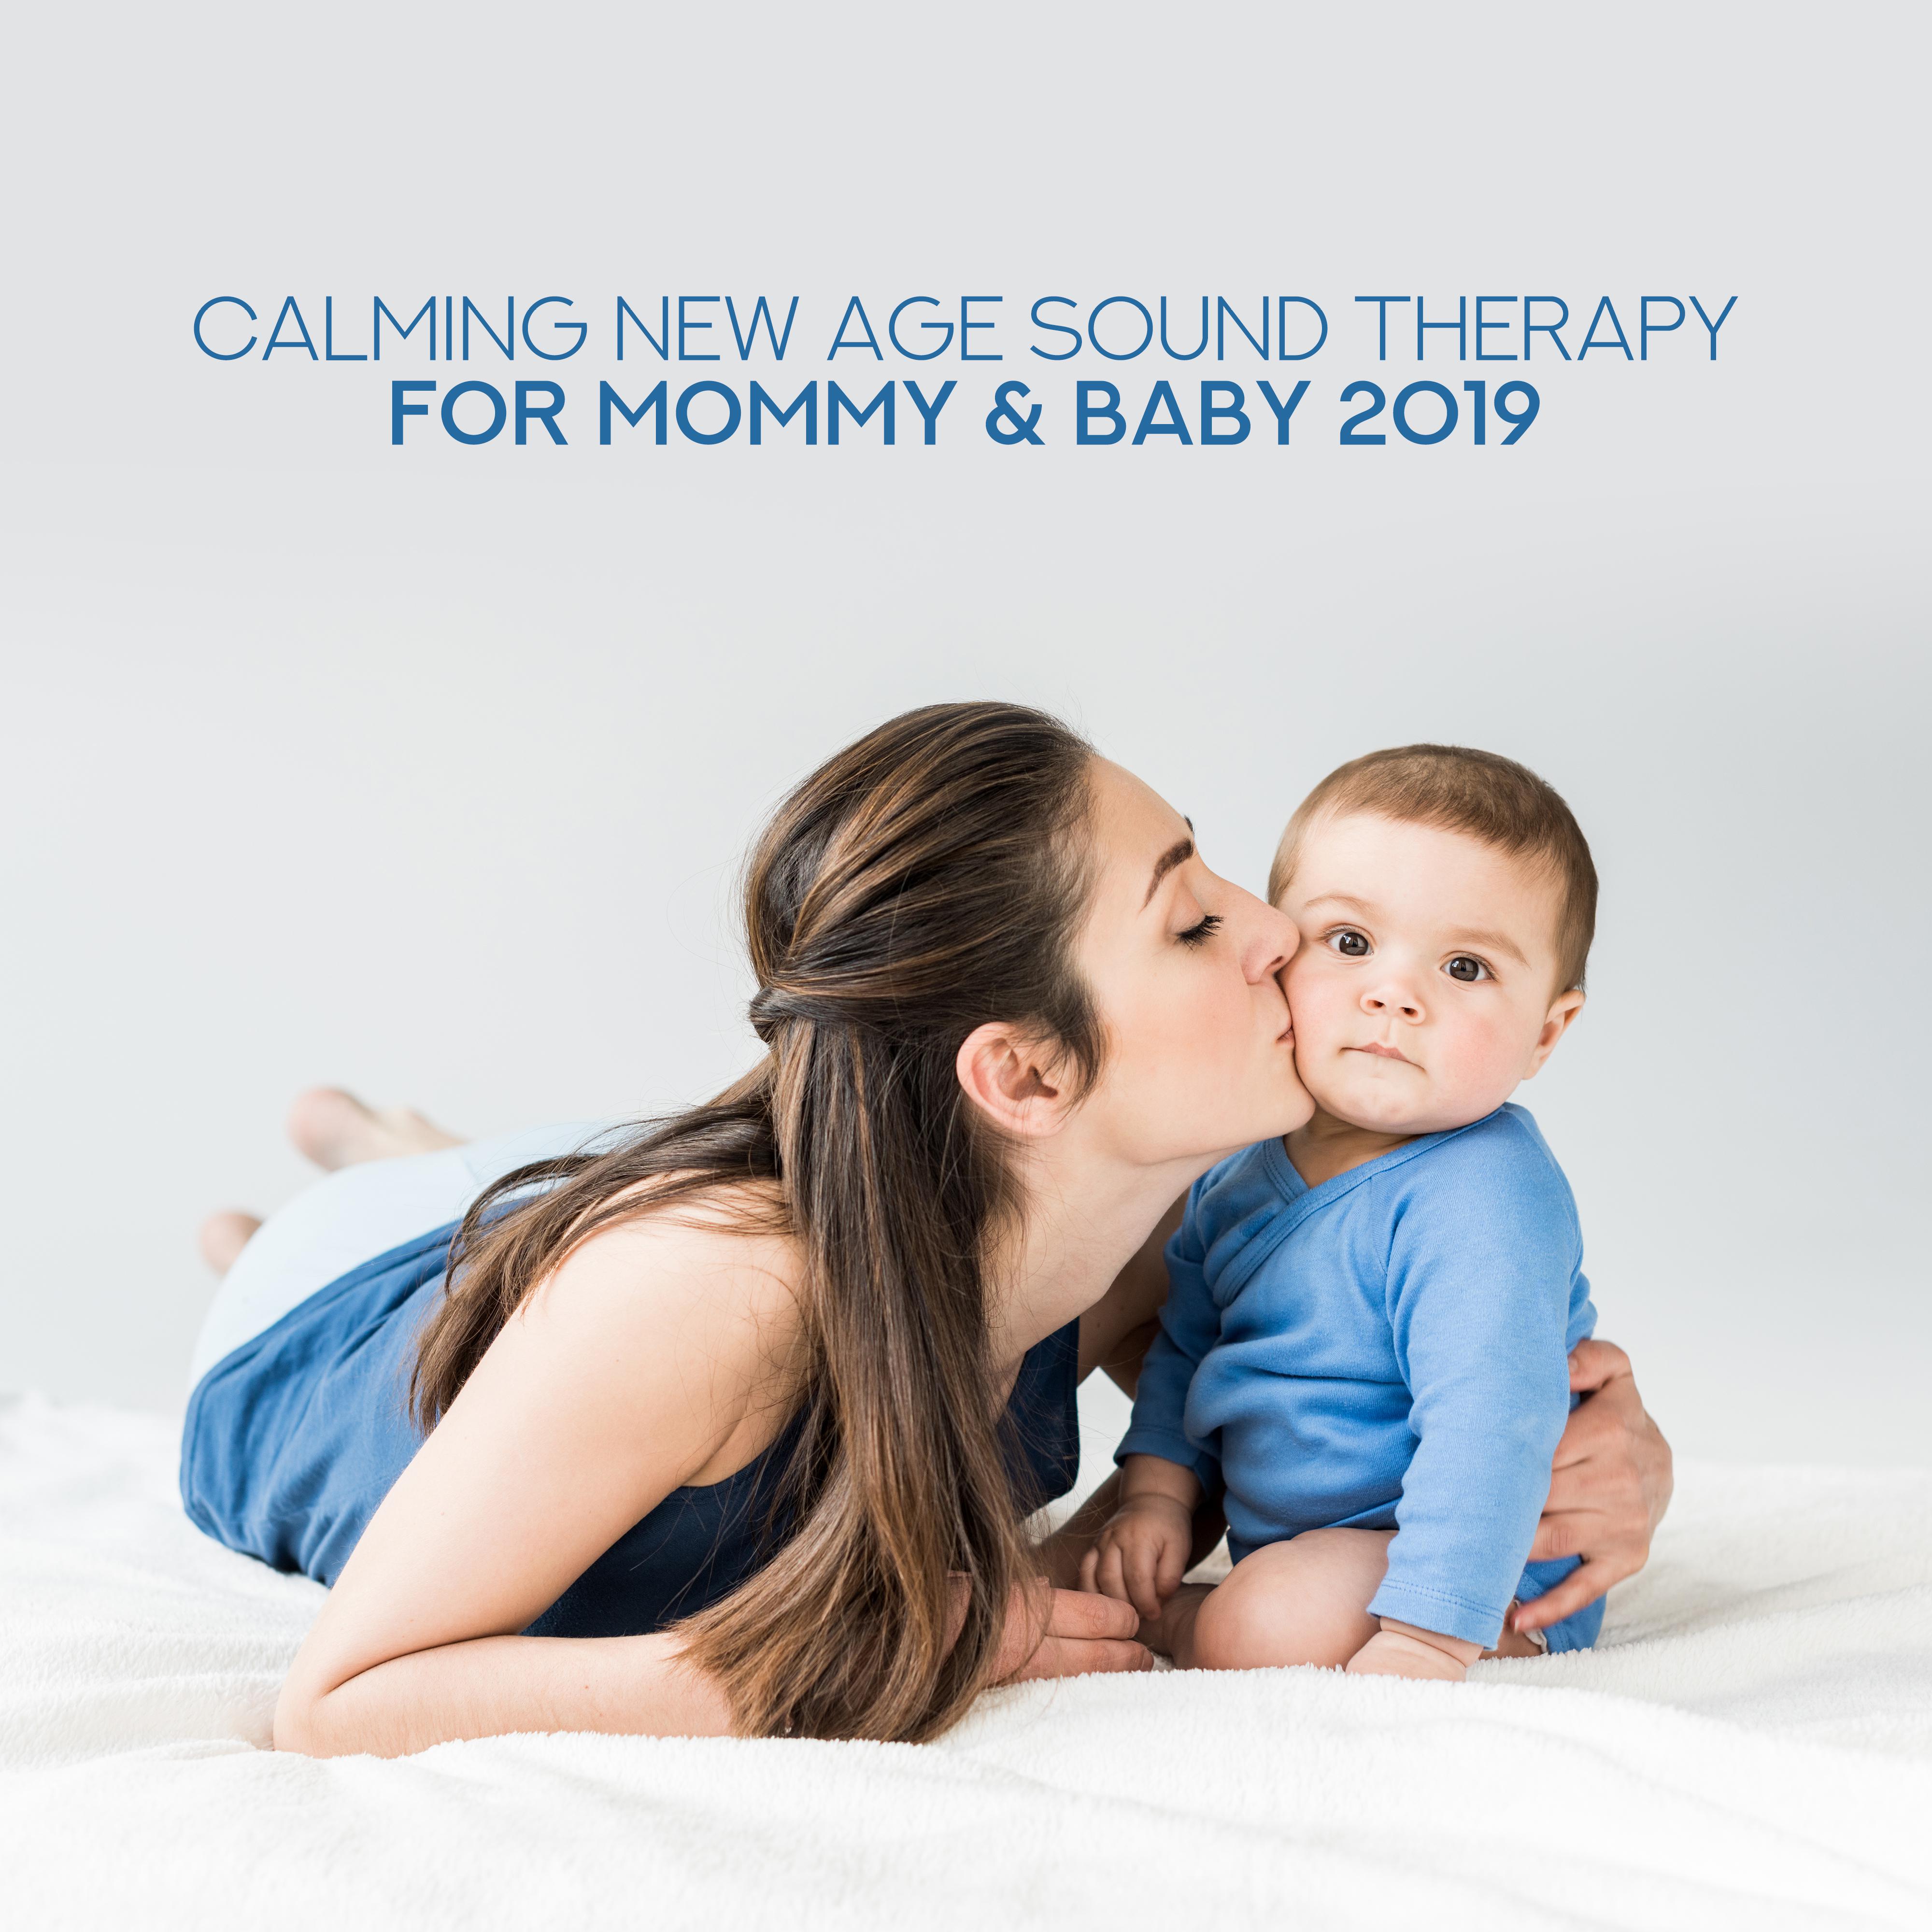 Calming New Age Sound Therapy for Mommy & Baby 2019